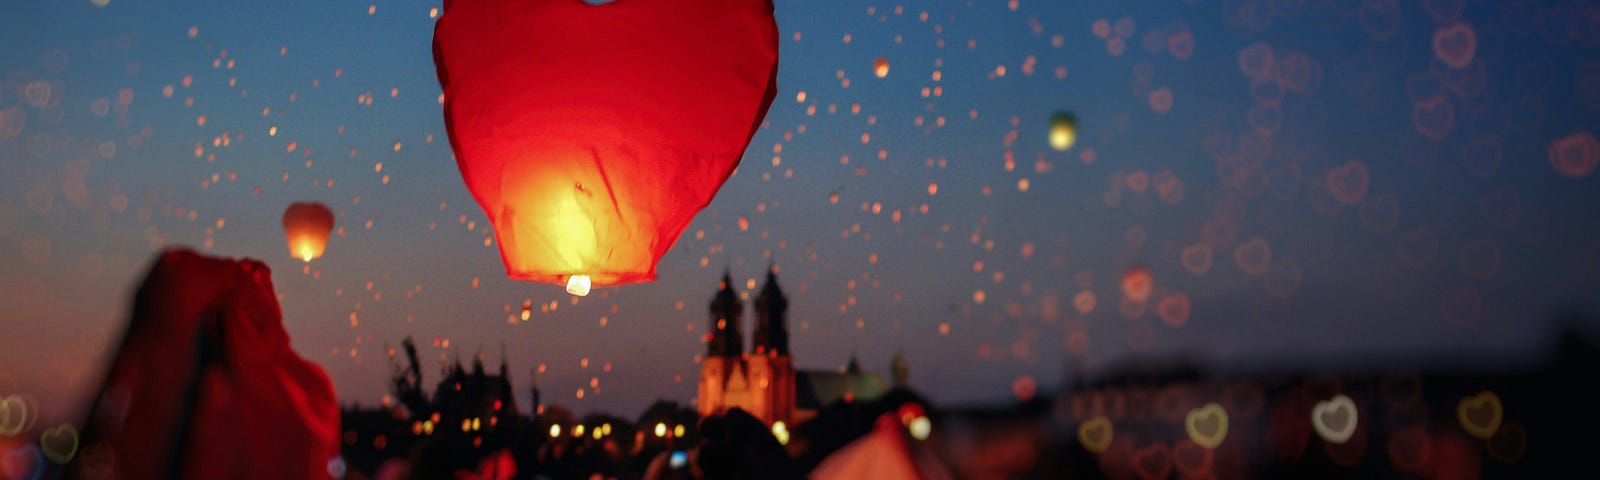 The night sky full of sky lanterns in the shape of hearts.